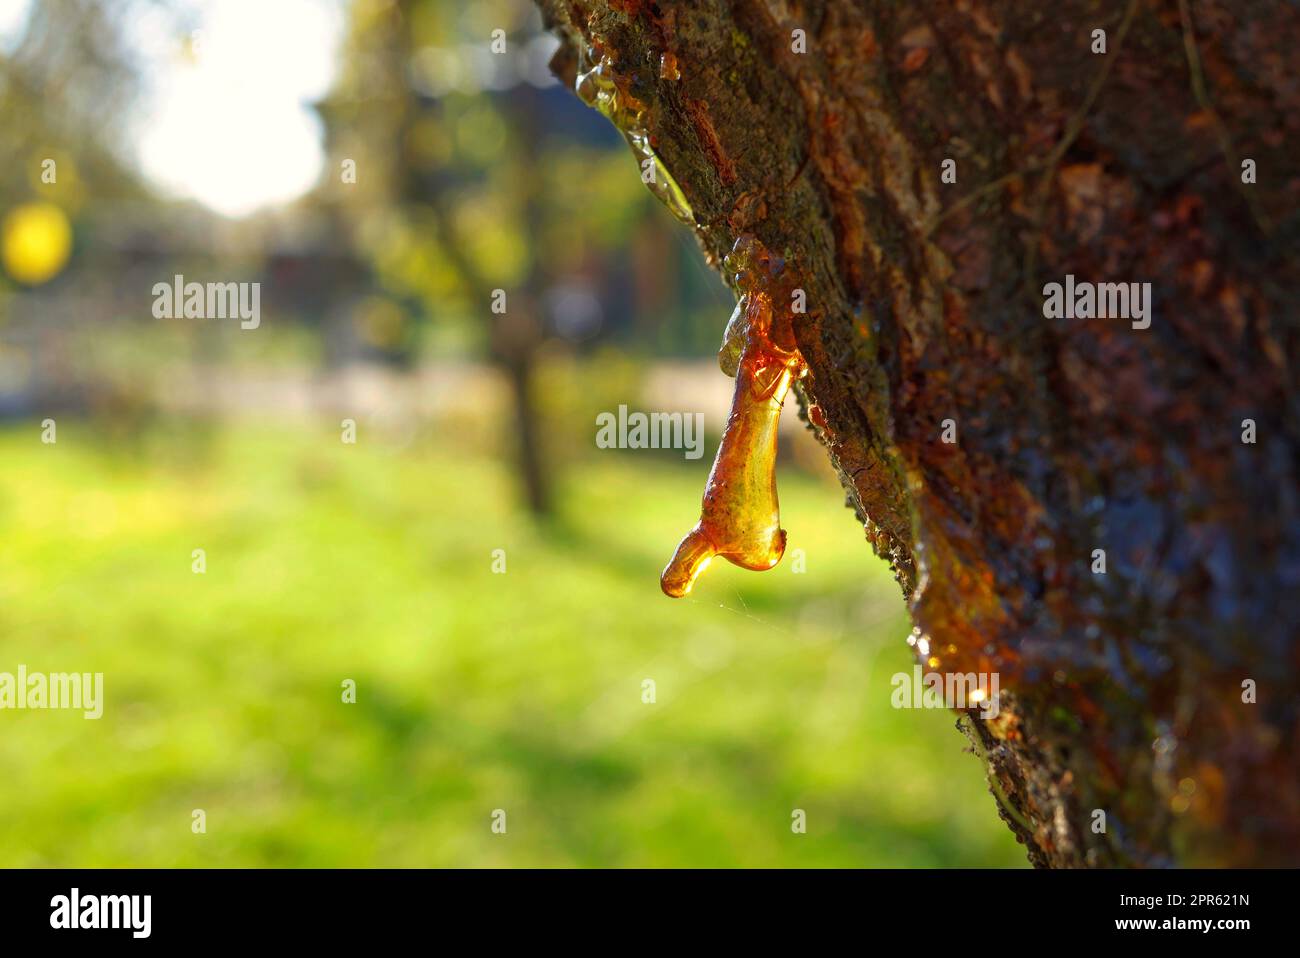 Sap or resin oozing from an injured tree branch Stock Photo